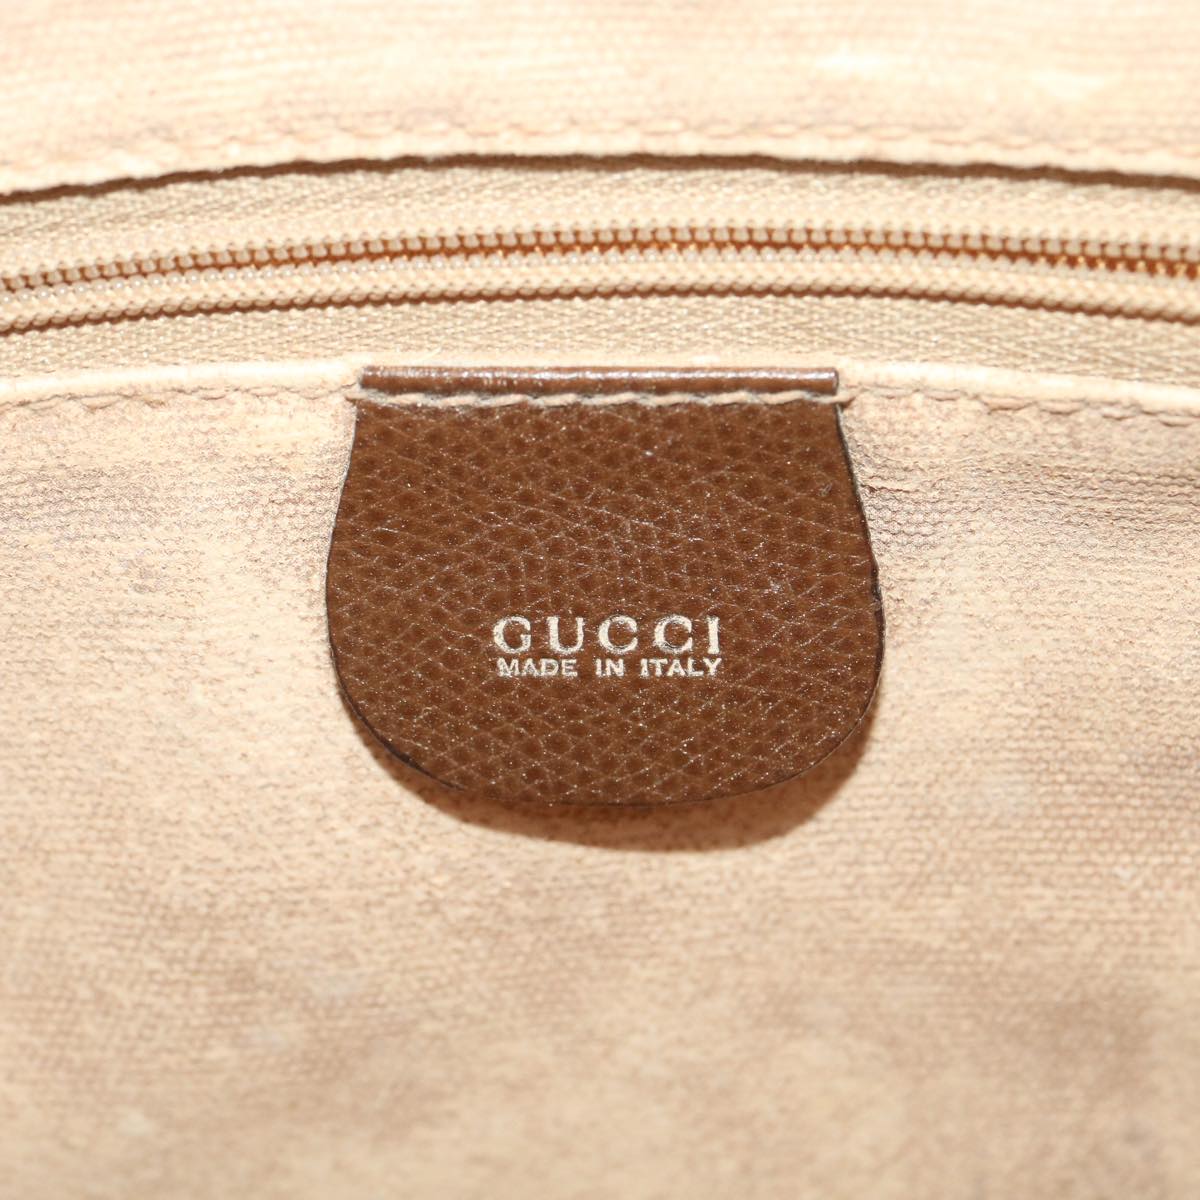 GUCCI GG Canvas Web Sherry Line Shoulder Bag Red Beige Green 001.56 Auth yk6153B